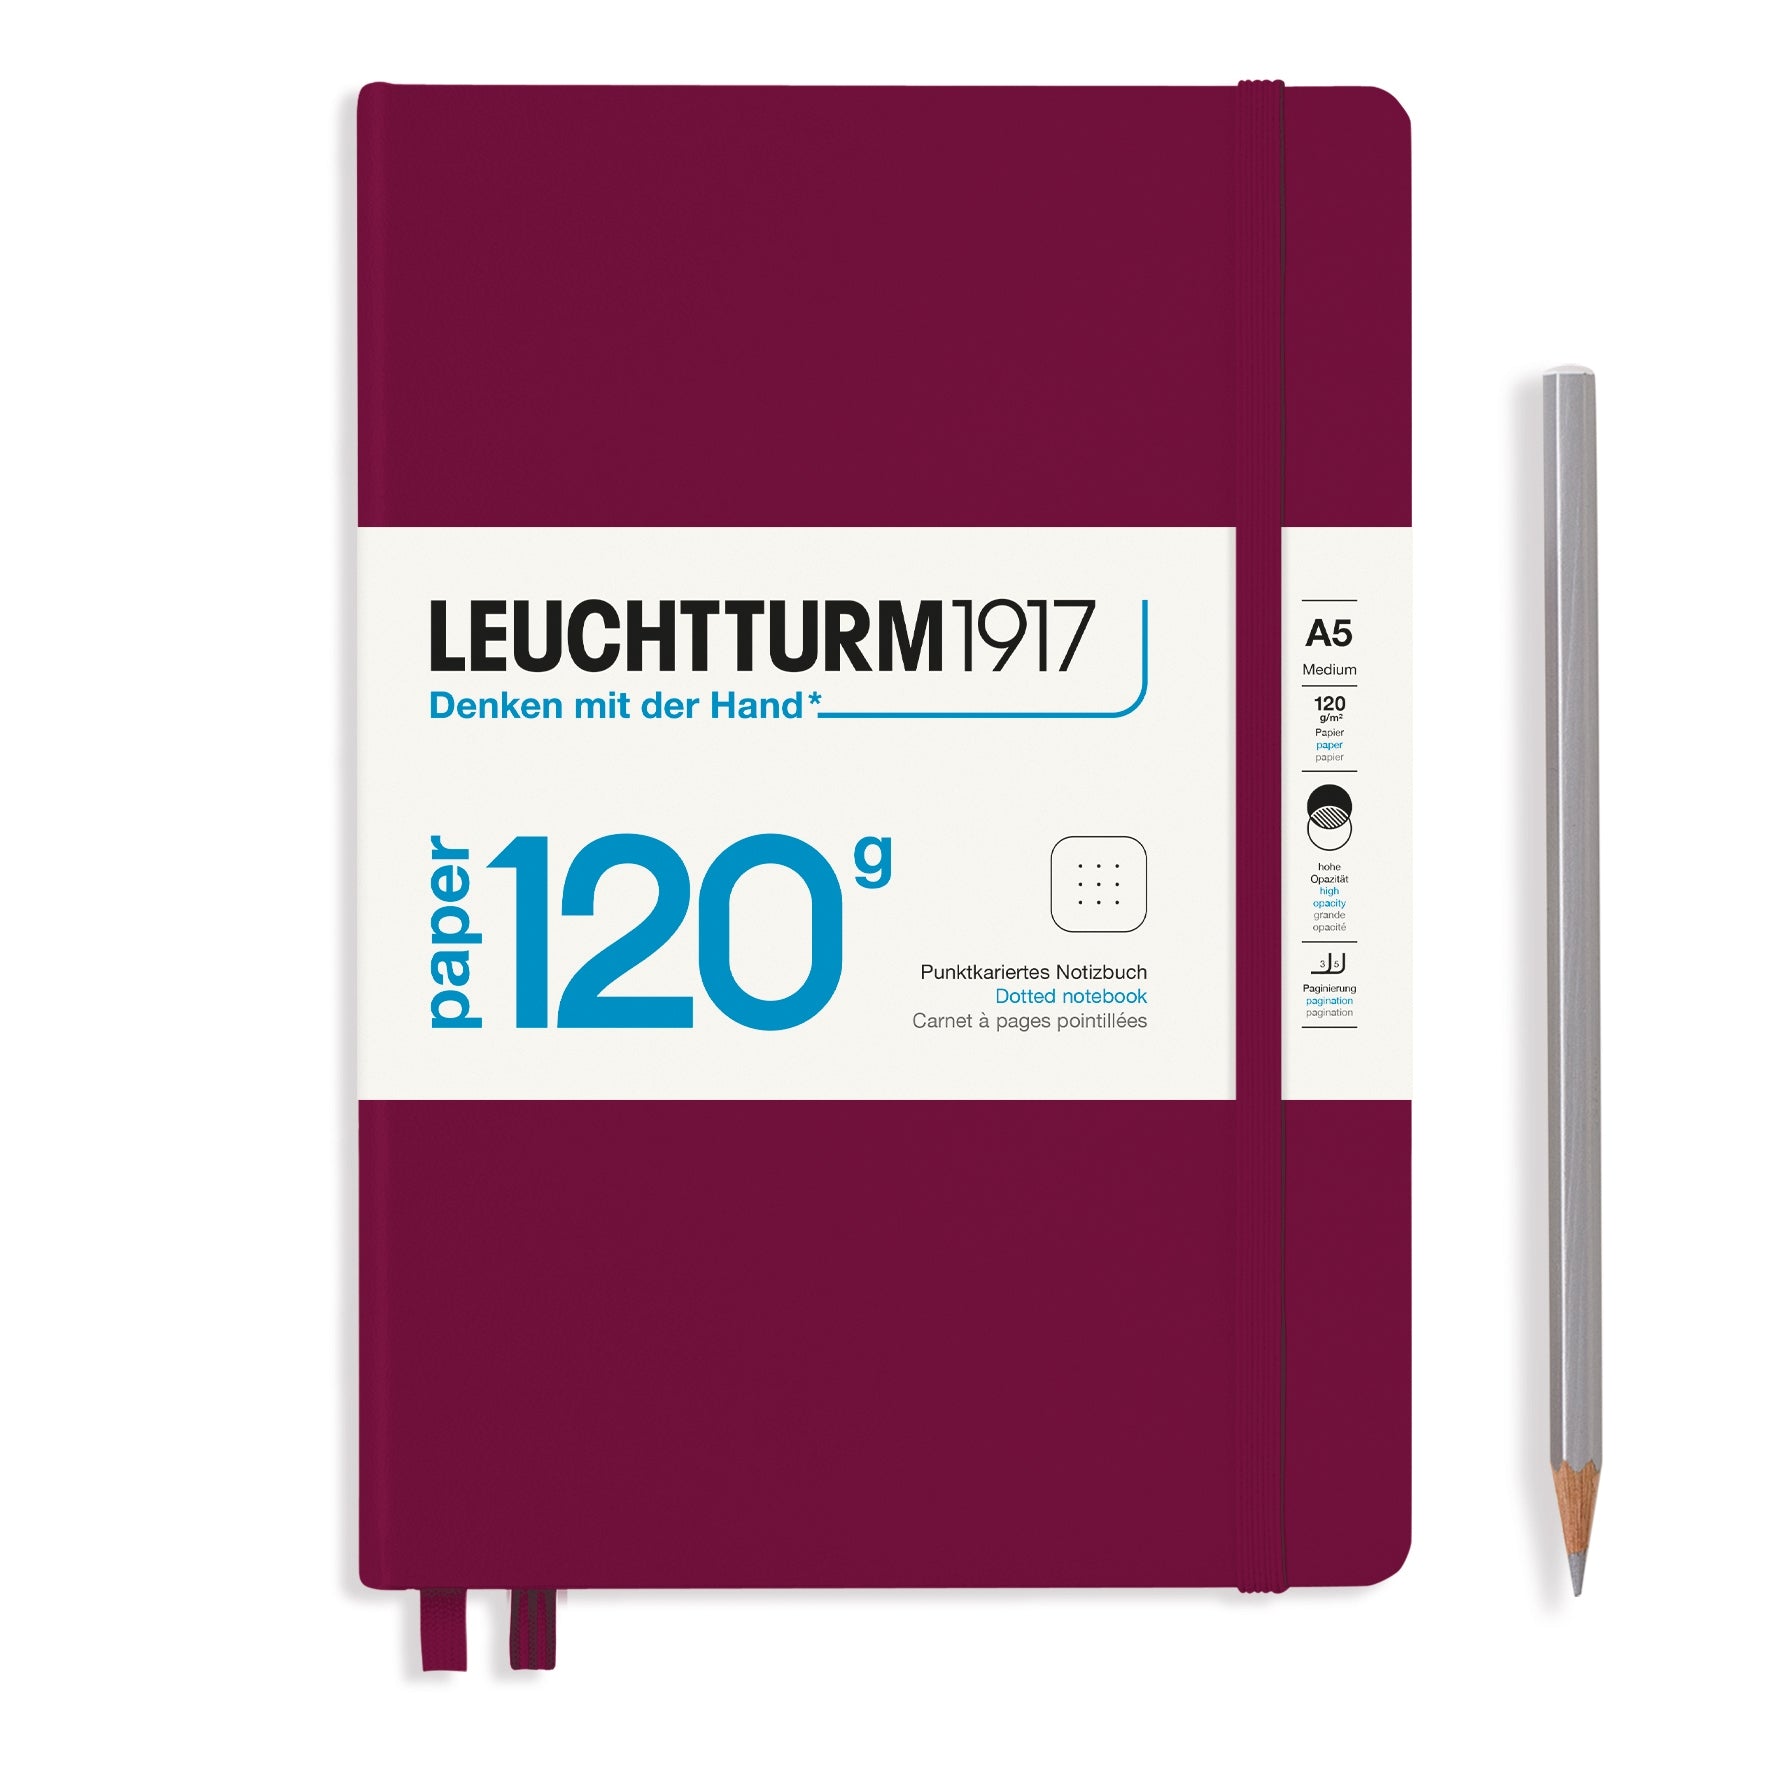 Leuchtturm1917, 120g Notebook Edition, A5, 203 Pages, Port Red